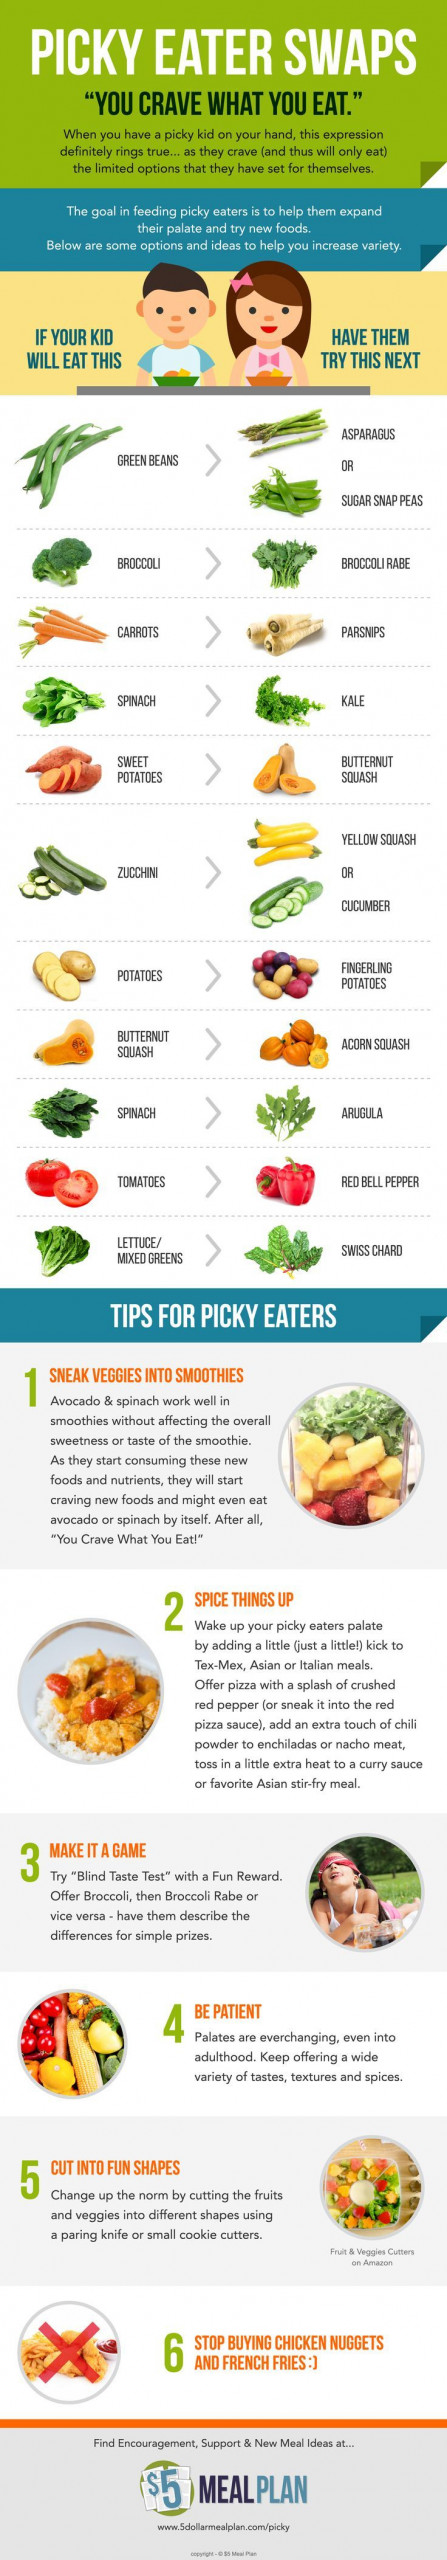 293 Best Picky Eater Kids Tips Recipes Images On 